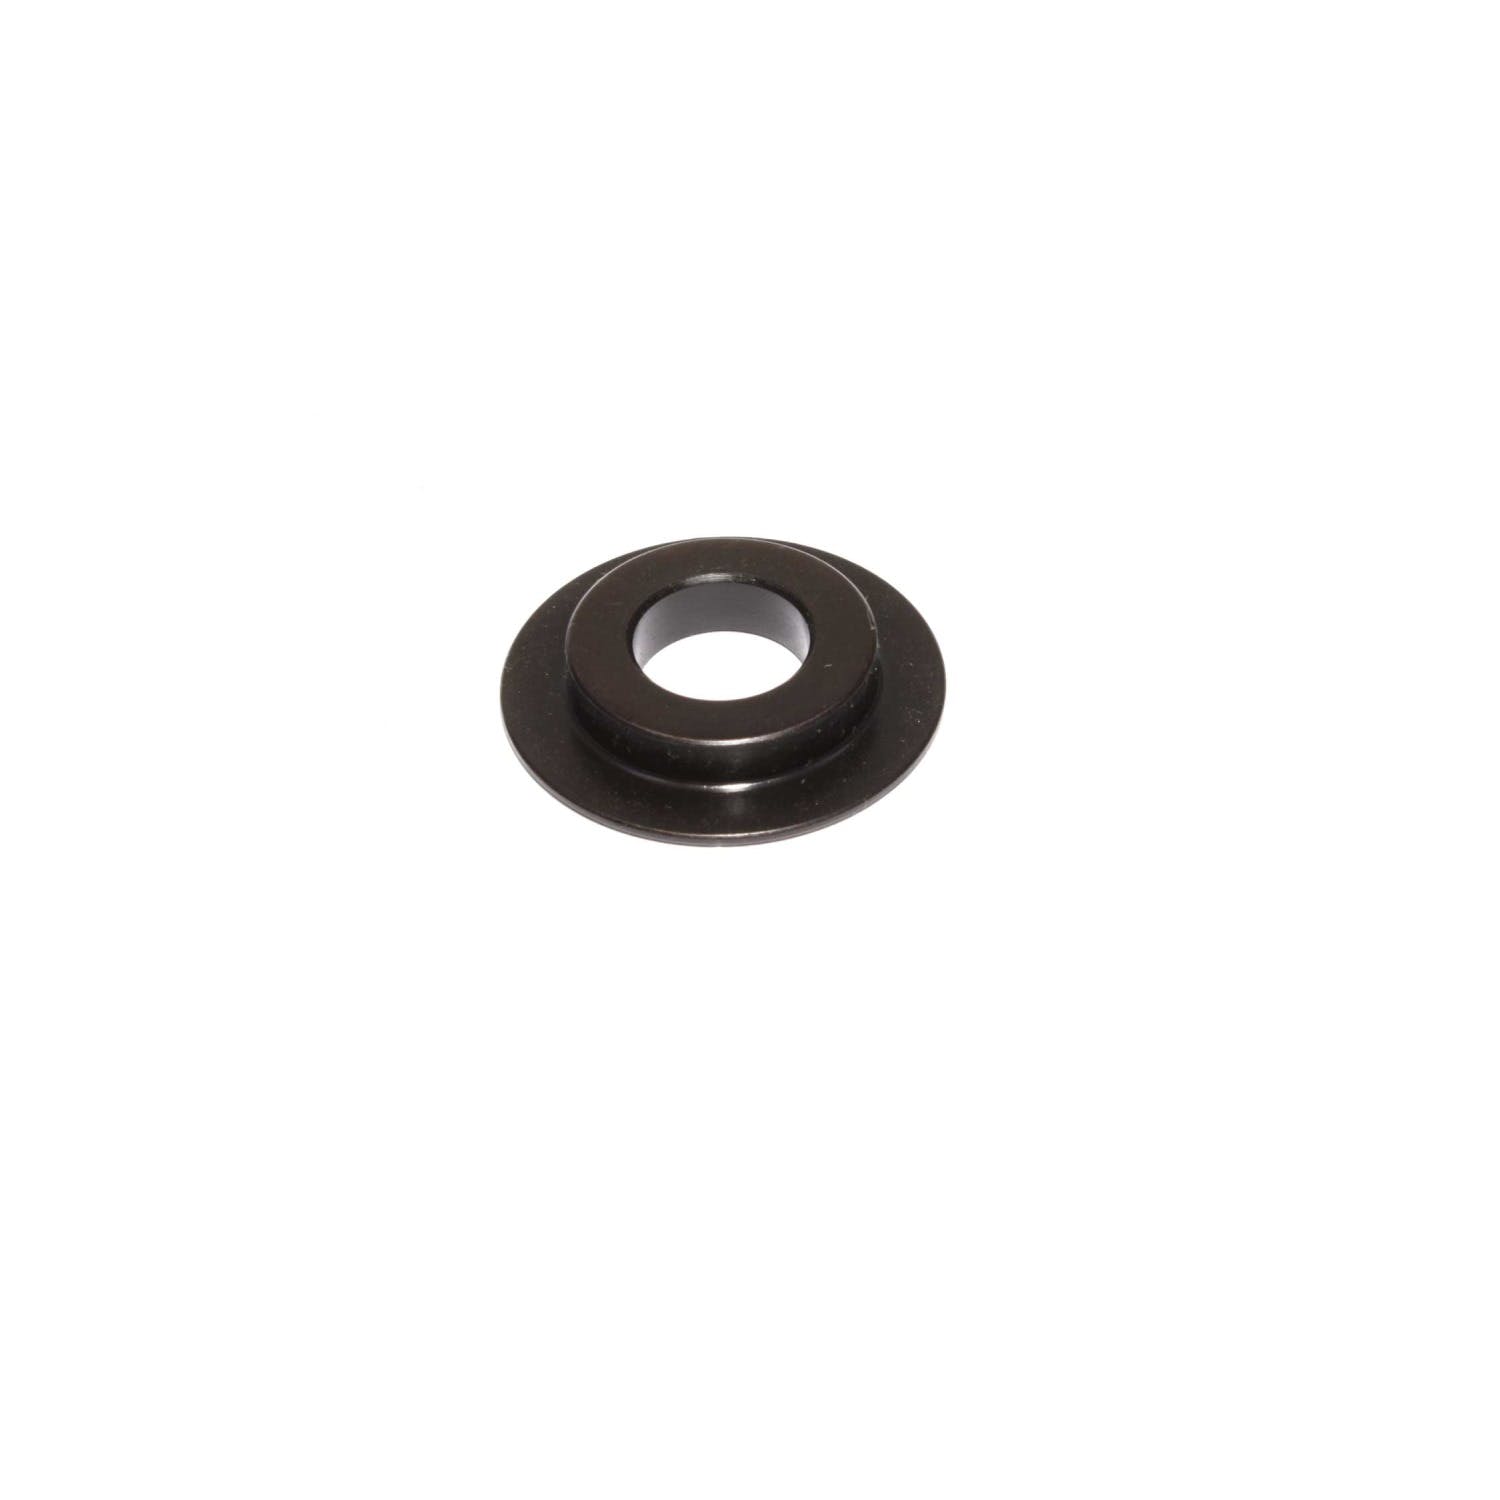 Competition Cams 4673-1 ID Spring Locator - 1.080 inch OD, .440 inch ID, .045 inch Thickness